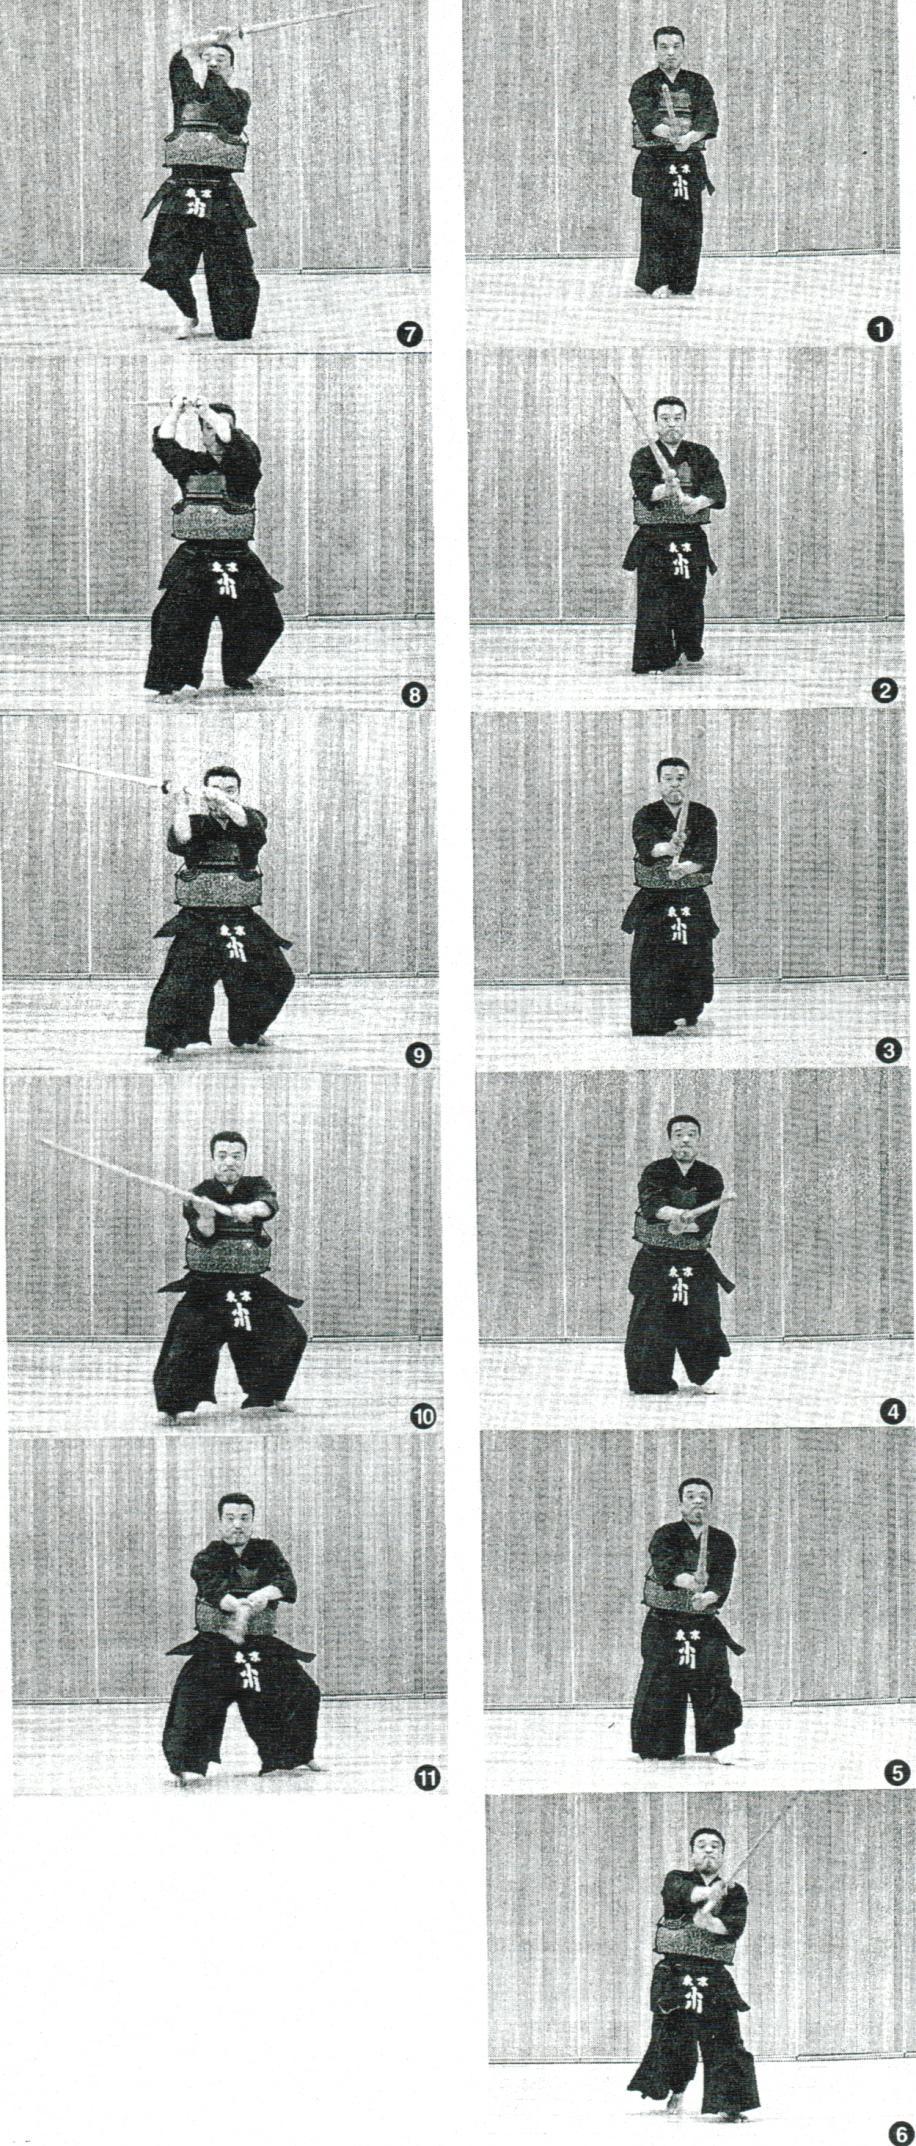 KENDO CLASSROOM ( 剣道教室 ) for Wining Kendo Waza Dō Page 3 of 7 Gyakudō ( 逆胴 ) Shikake Waza - Continued Tip 11 The pictures 2-4 on the right show as if you